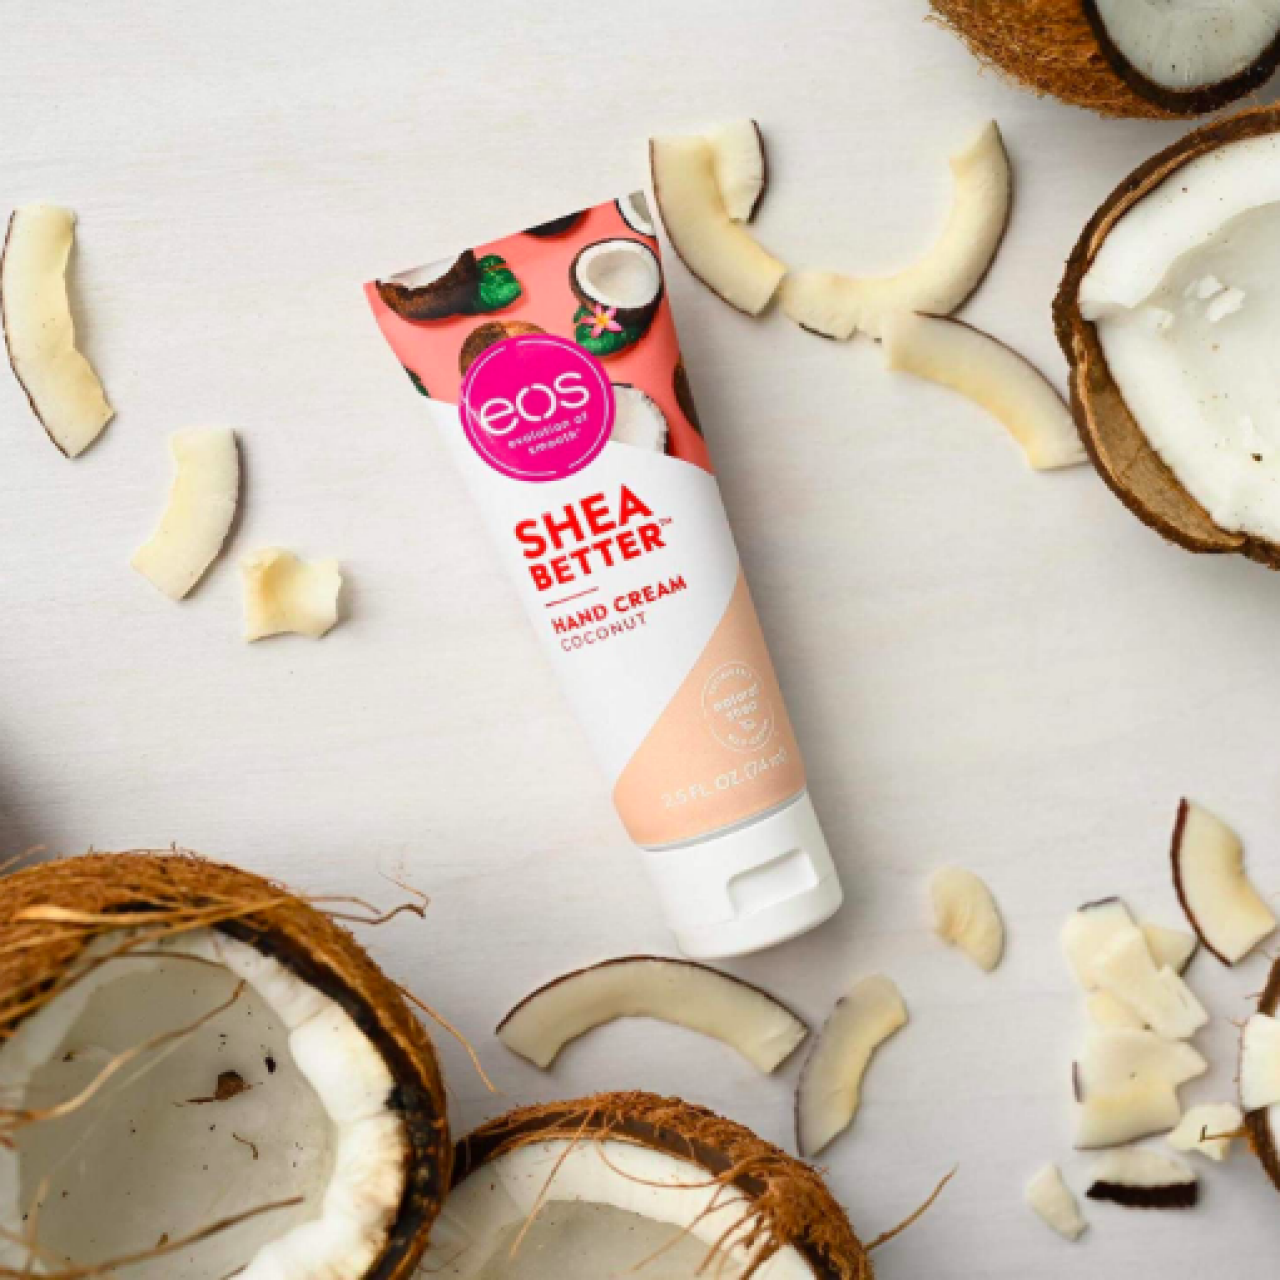 Lovea Hydrating Hand Cream With Coconut Oil White 75mlFree